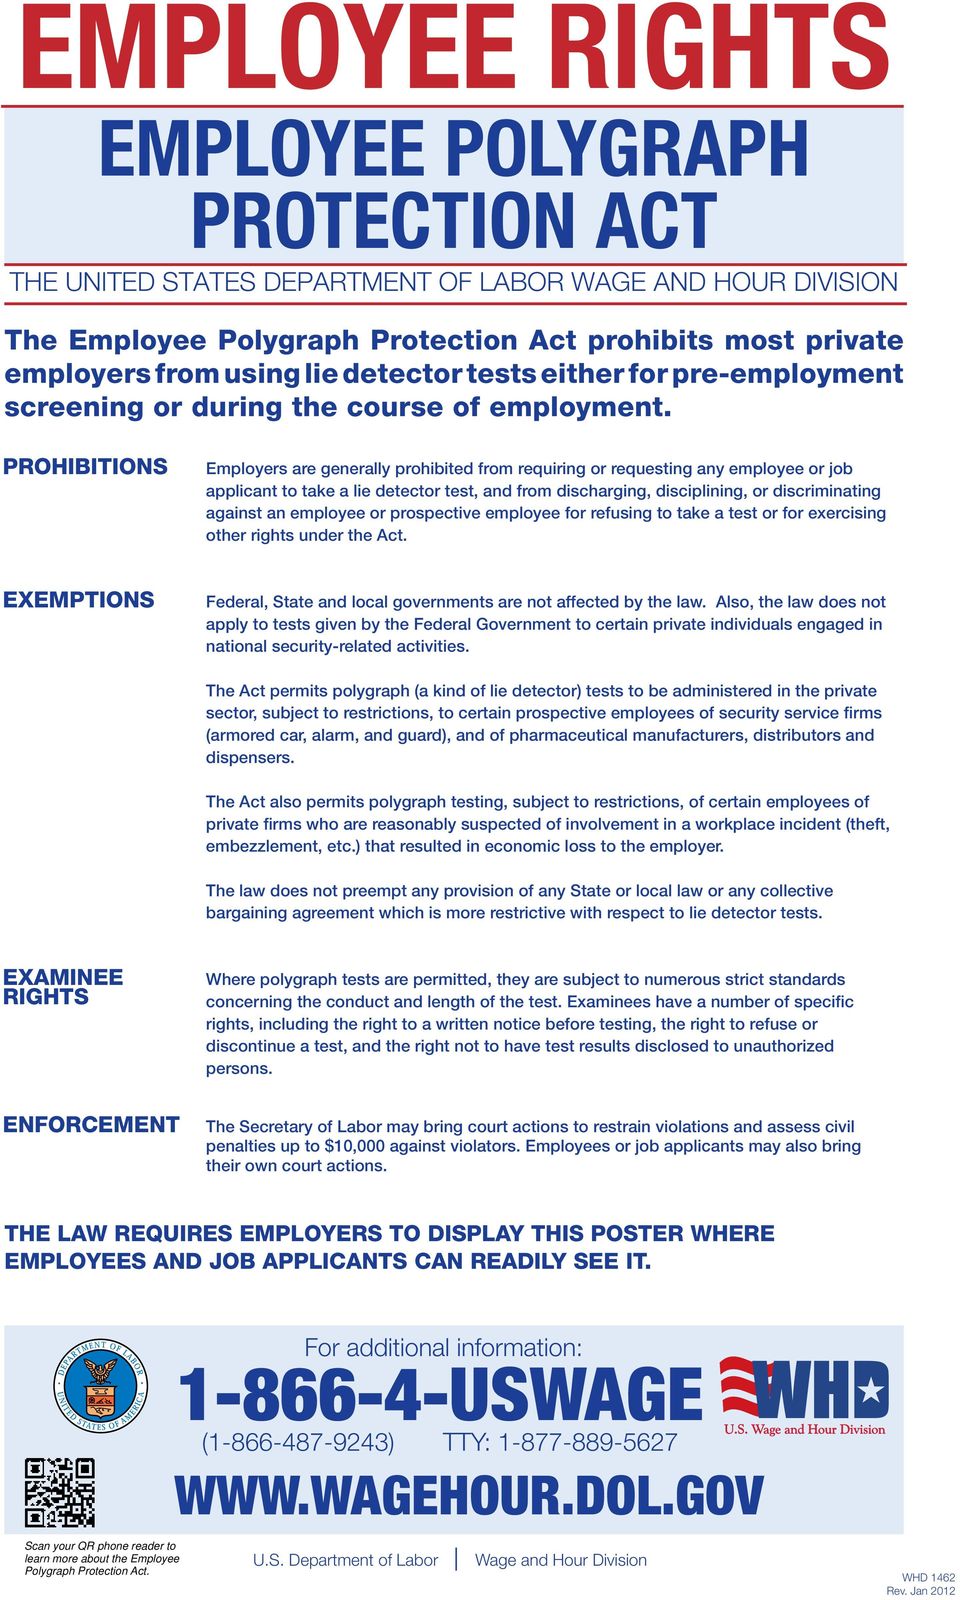 PROHIBITIONS Employers are generally prohibited from requiring or requesting any employee or job applicant to take a lie detector test, and from discharging, disciplining, or discriminating against